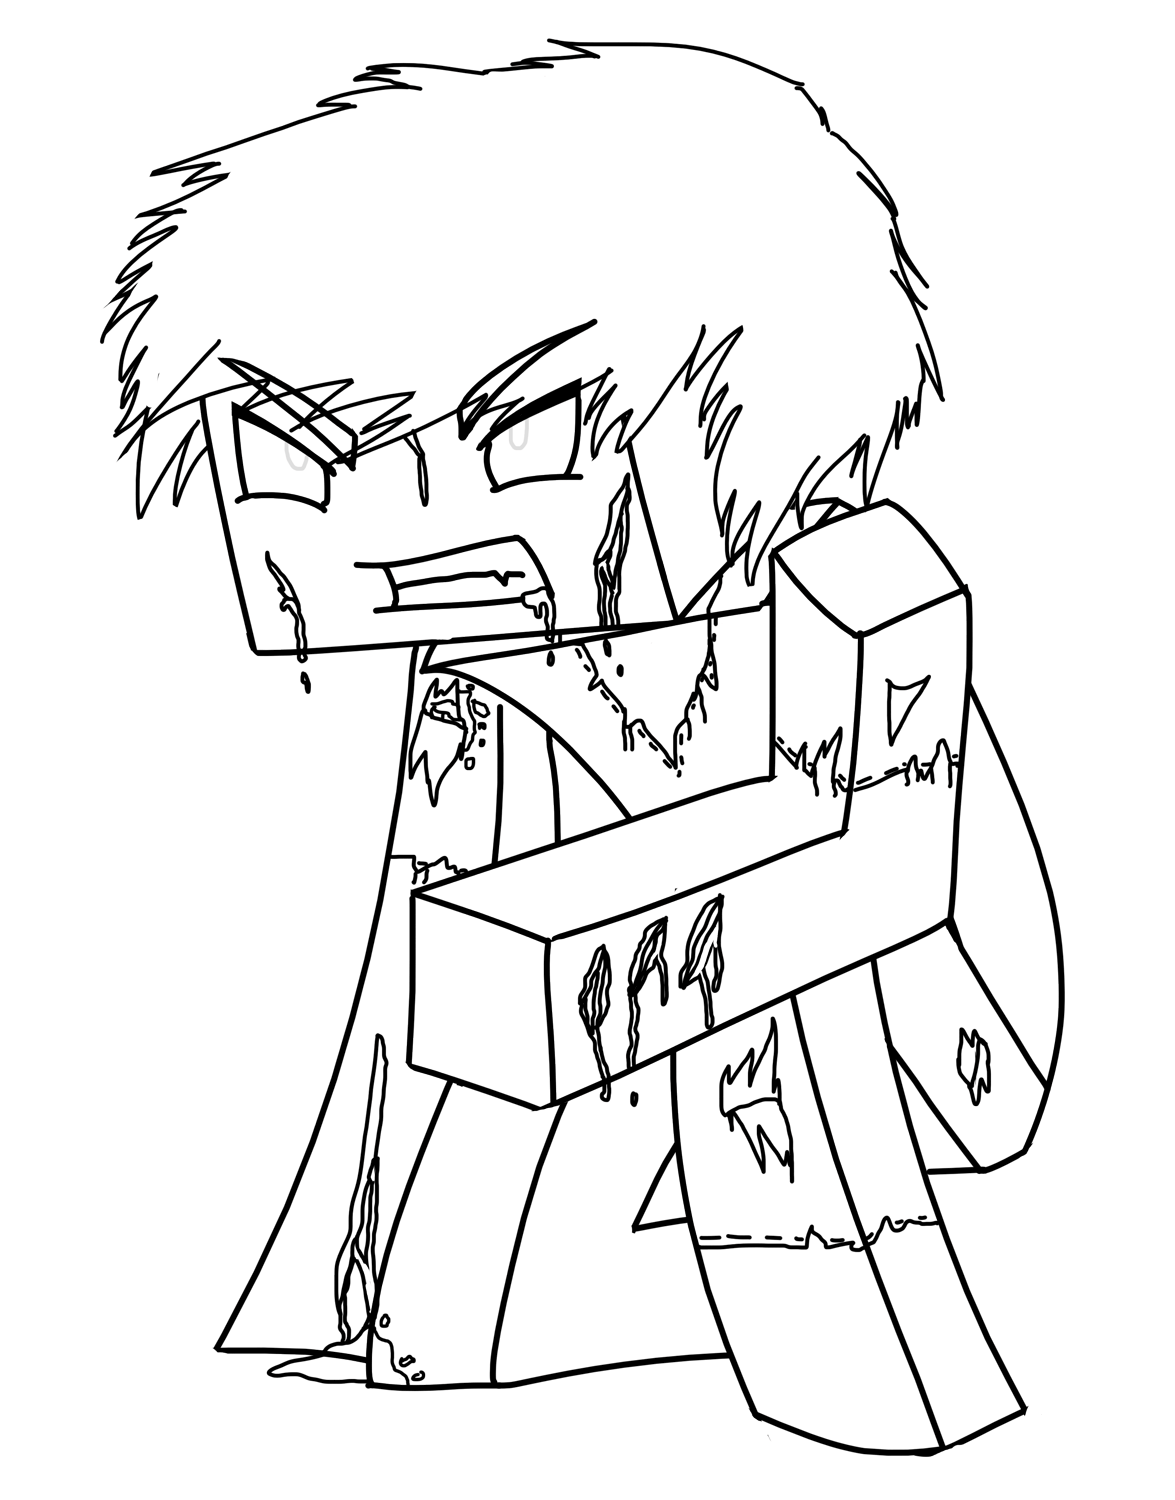 Zombie Steve Coloring Page - Free Printable Coloring Pages ...